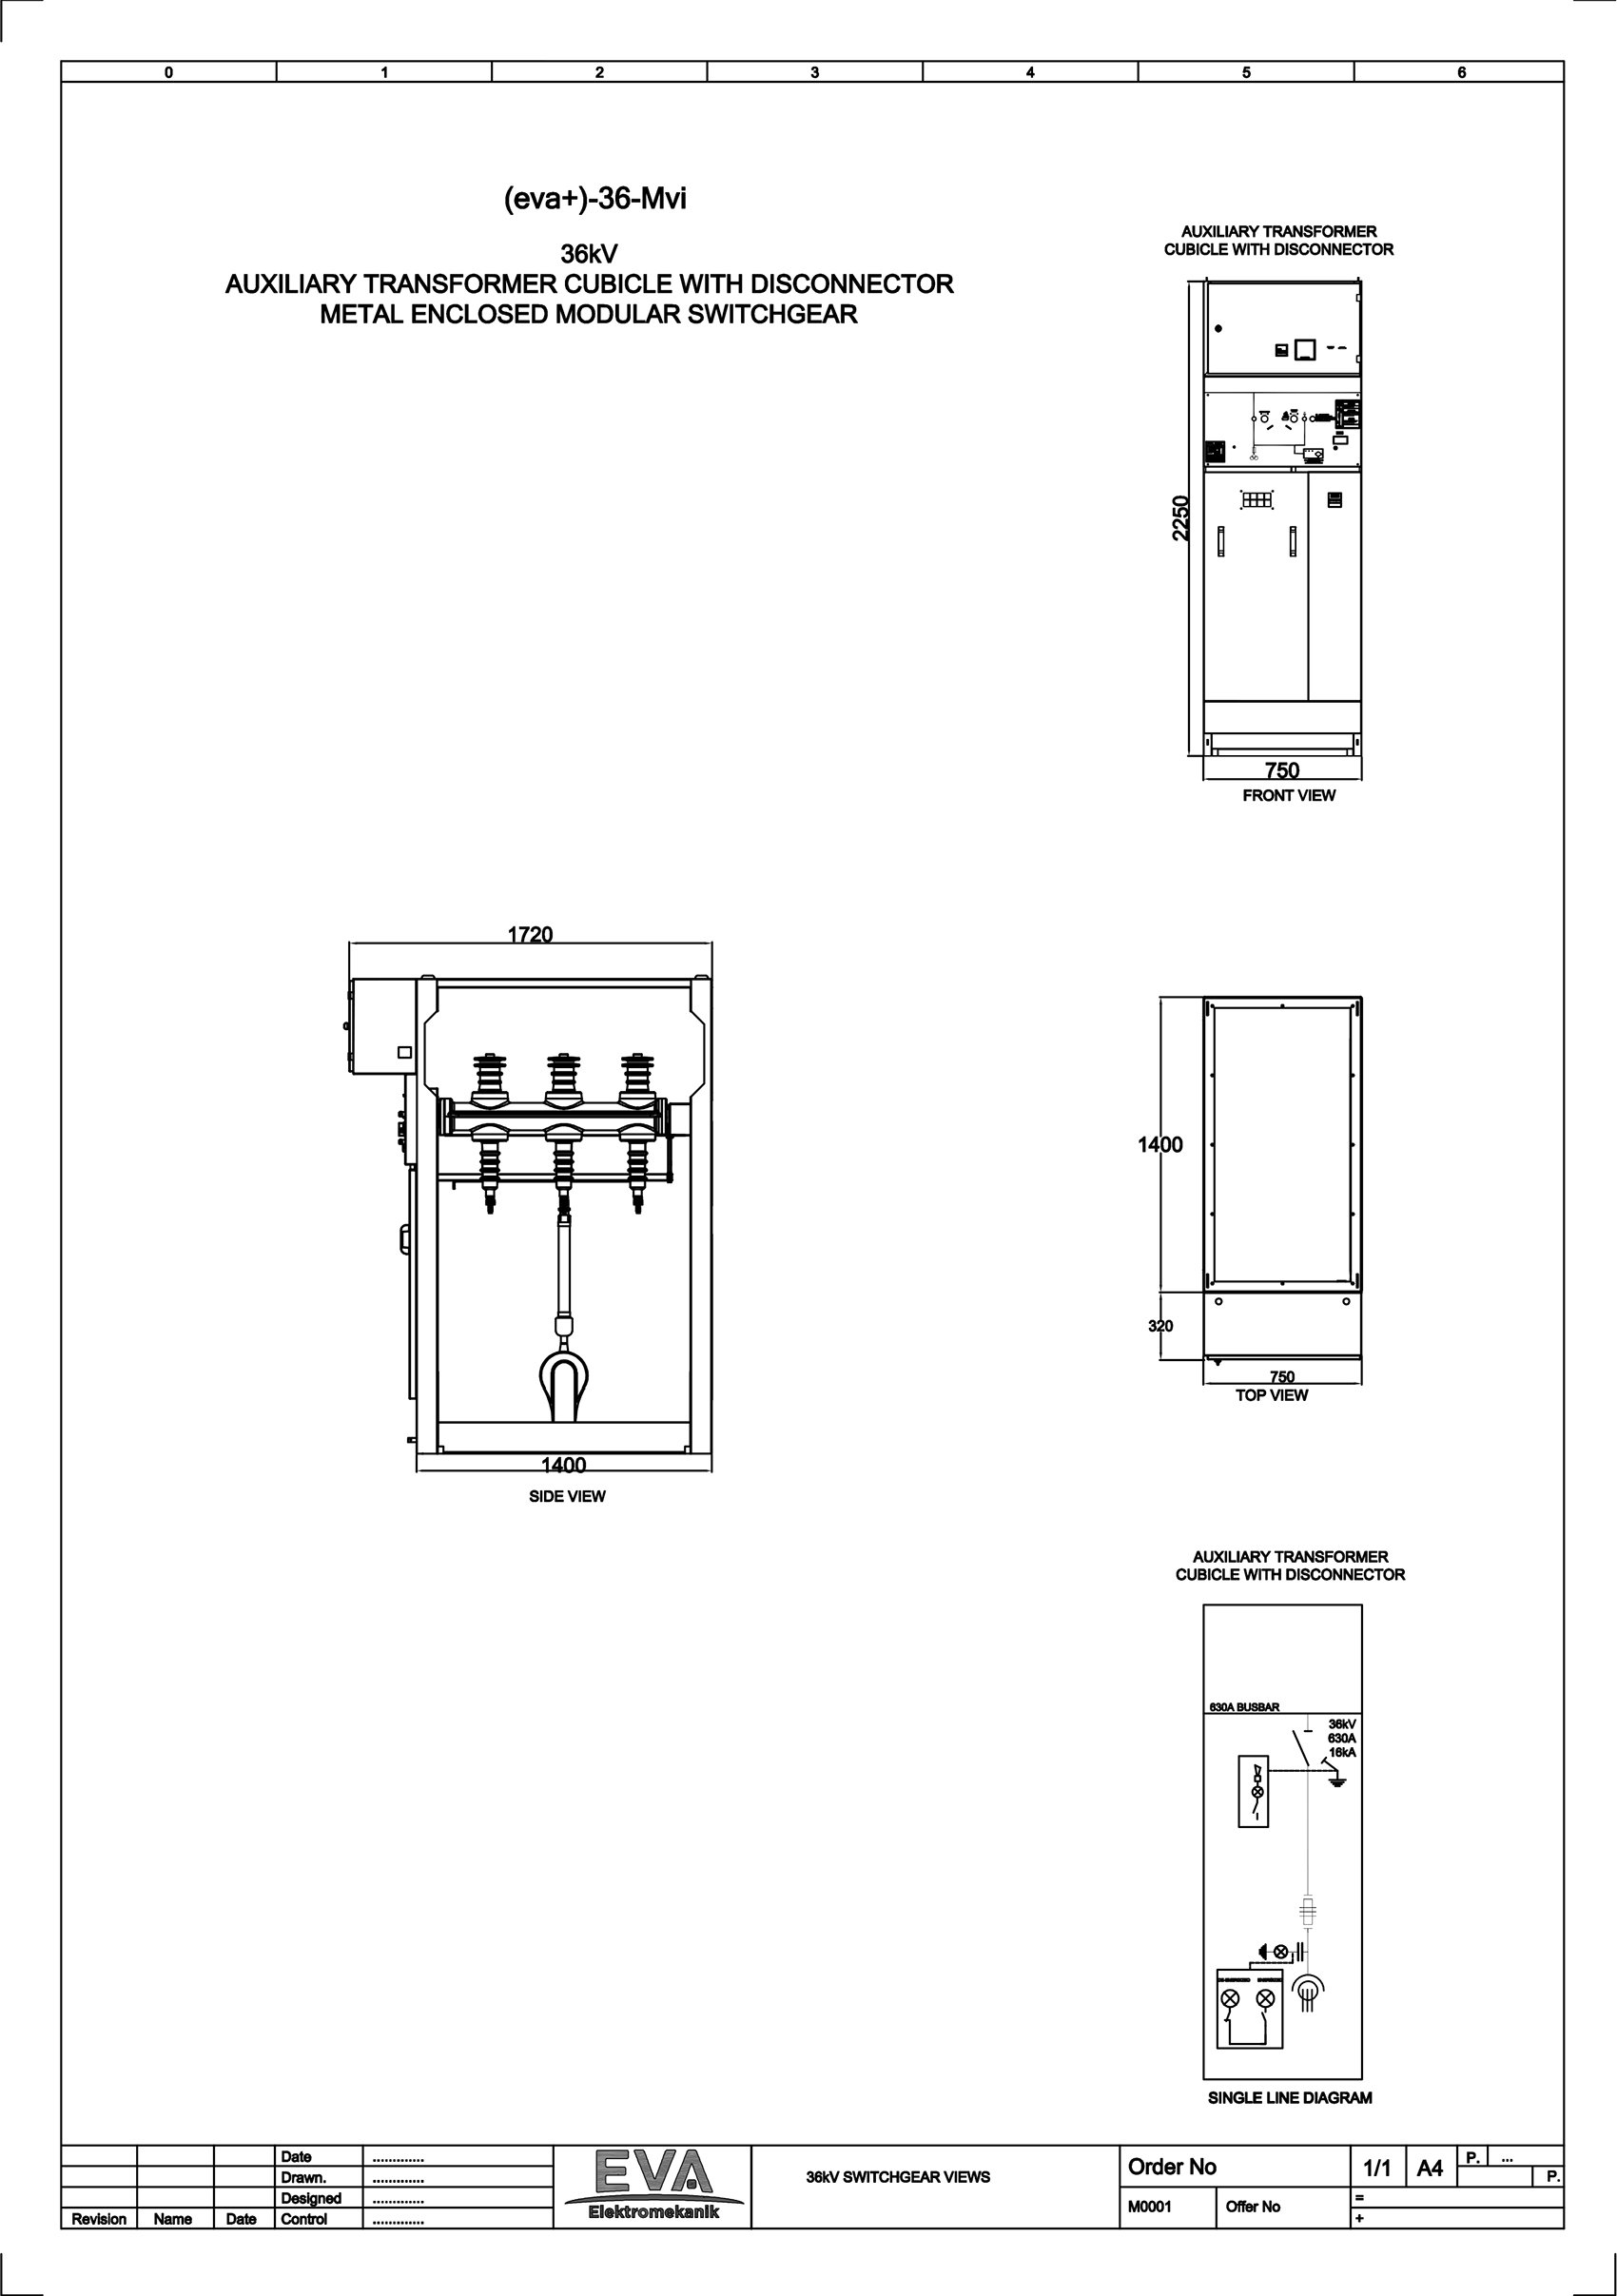 Auxiliary Transformer Cubicle with Disconnector	